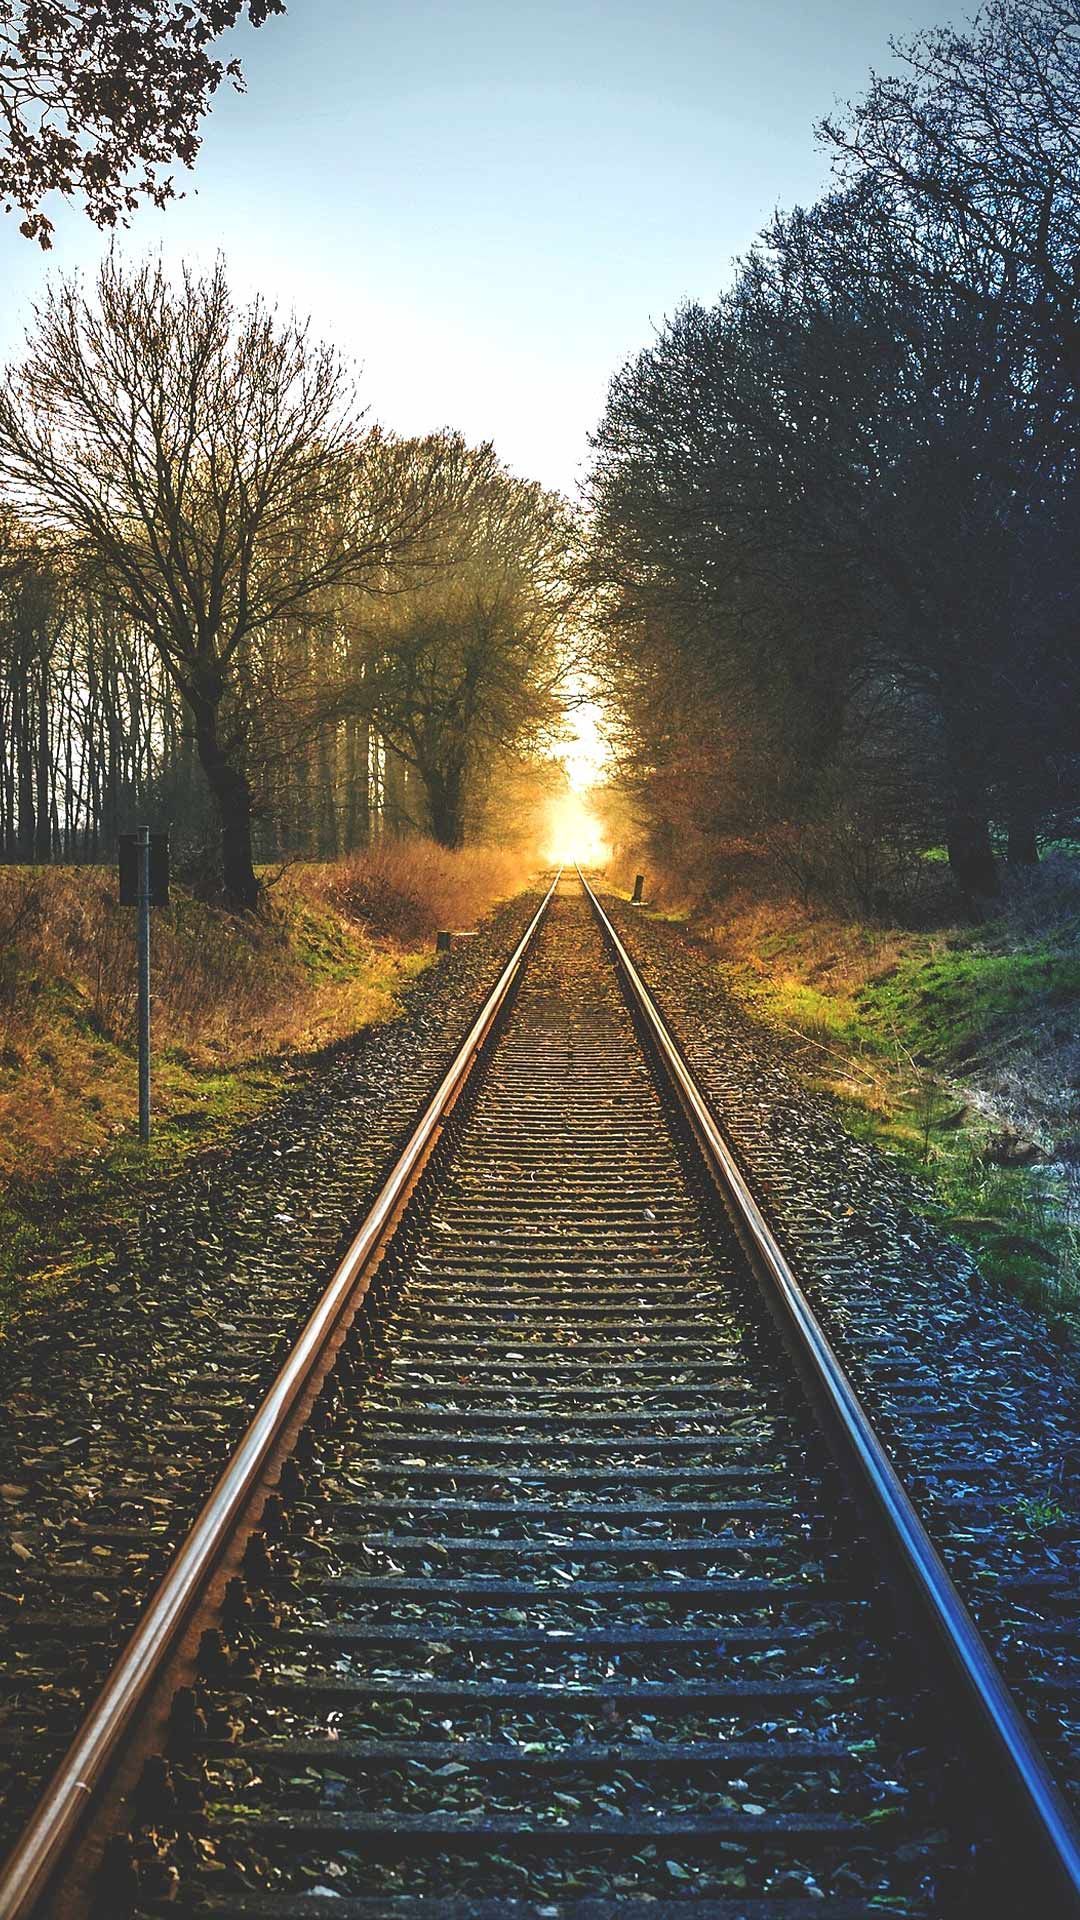 Train track wallpaper phone background for free download